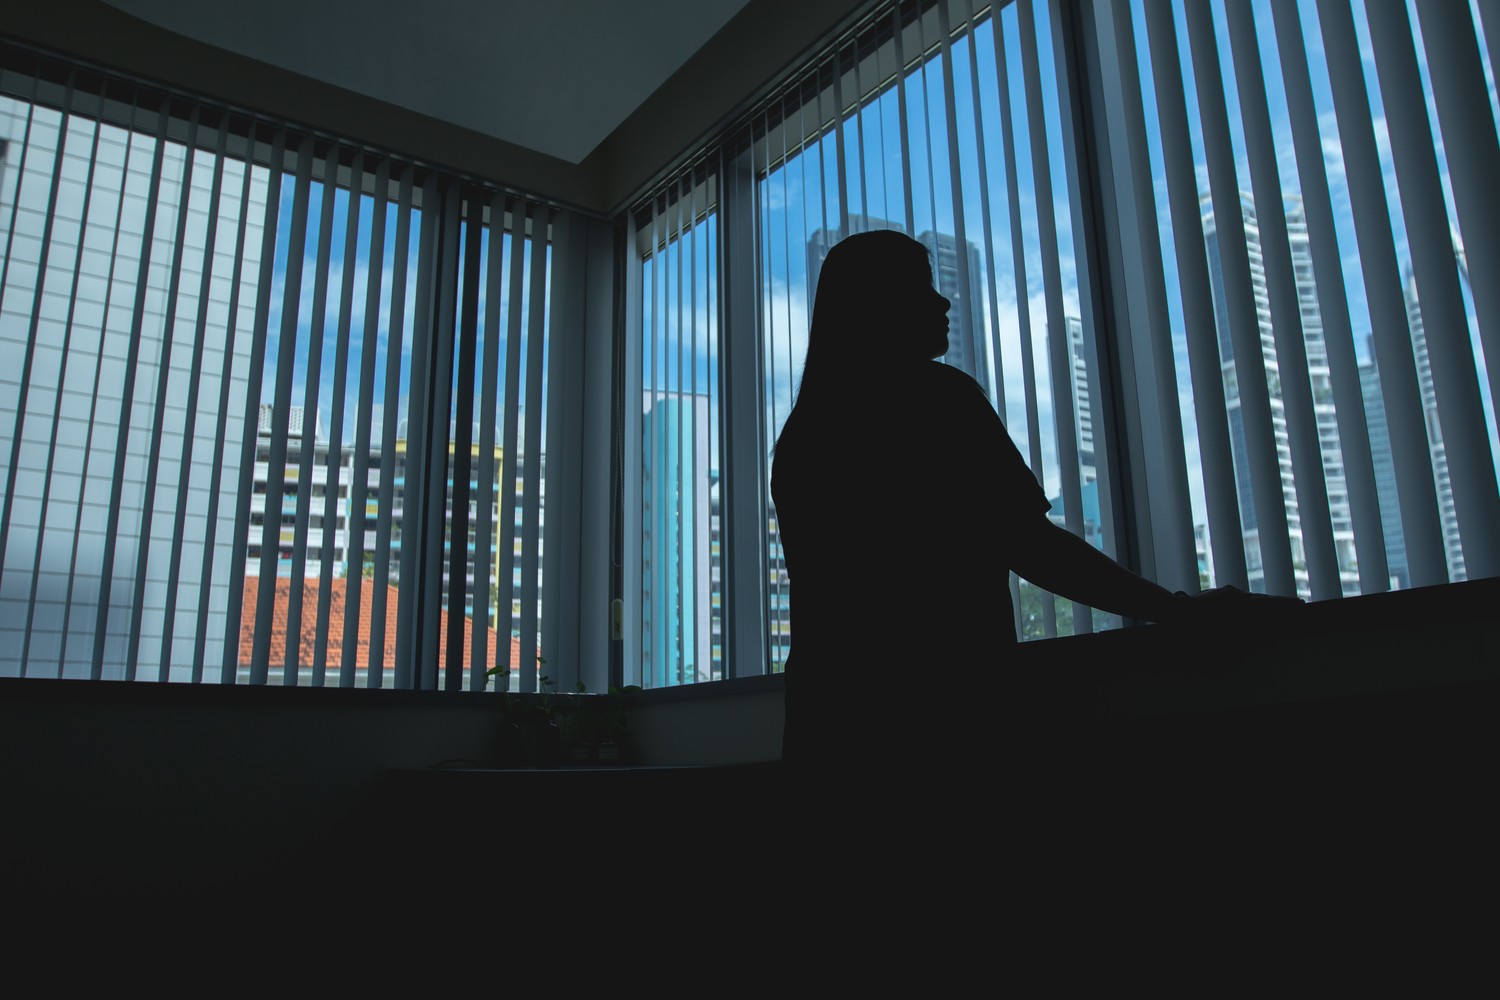 a female silhouette standing facing the window blinds. The woman is seen to have slightly long and straight hair and appears to be wearing a polo tee